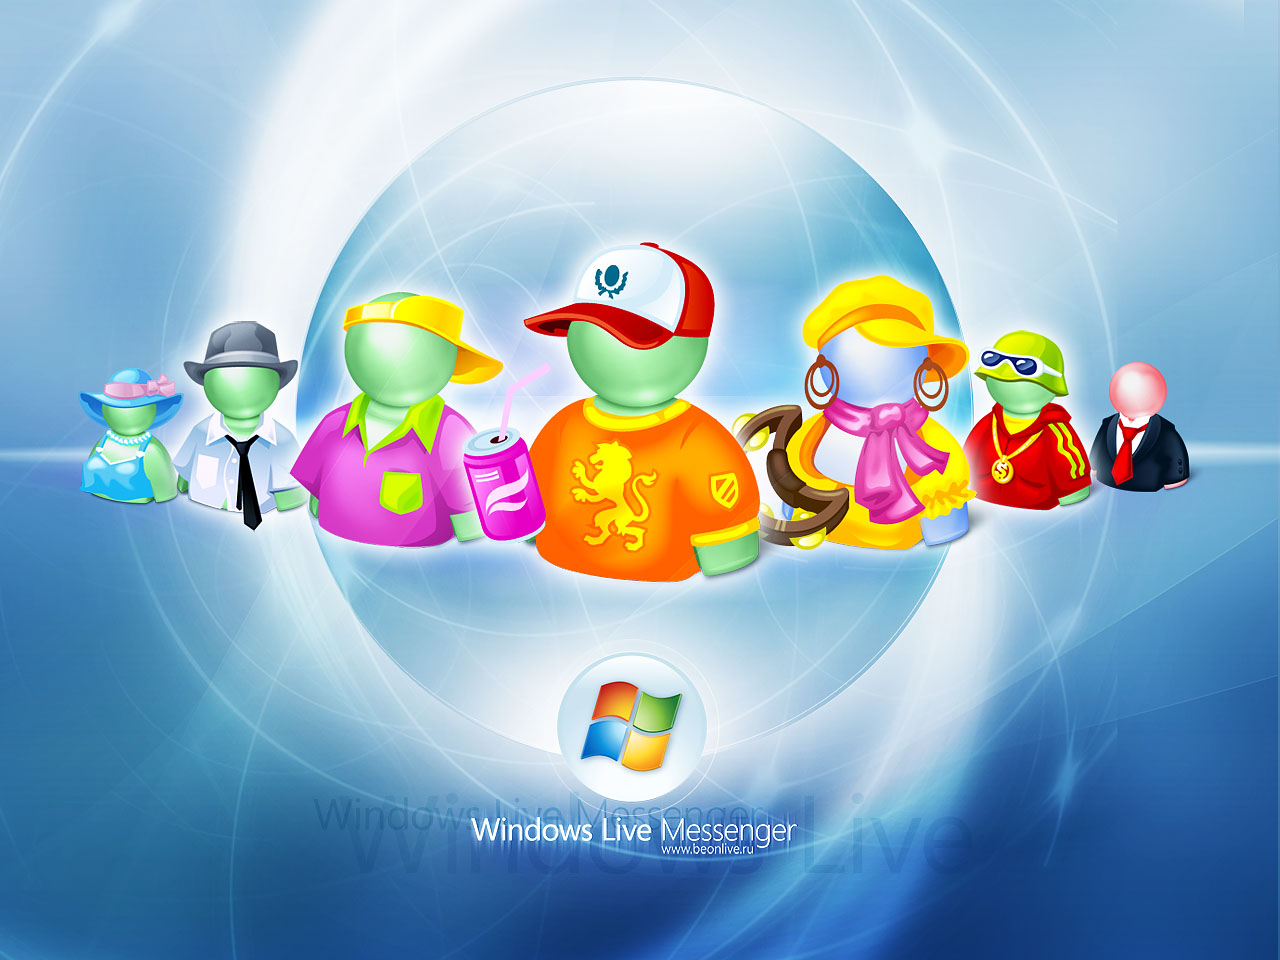 Free Games Wallpapers: Windows Live Messenger Wallpapers - Online ...